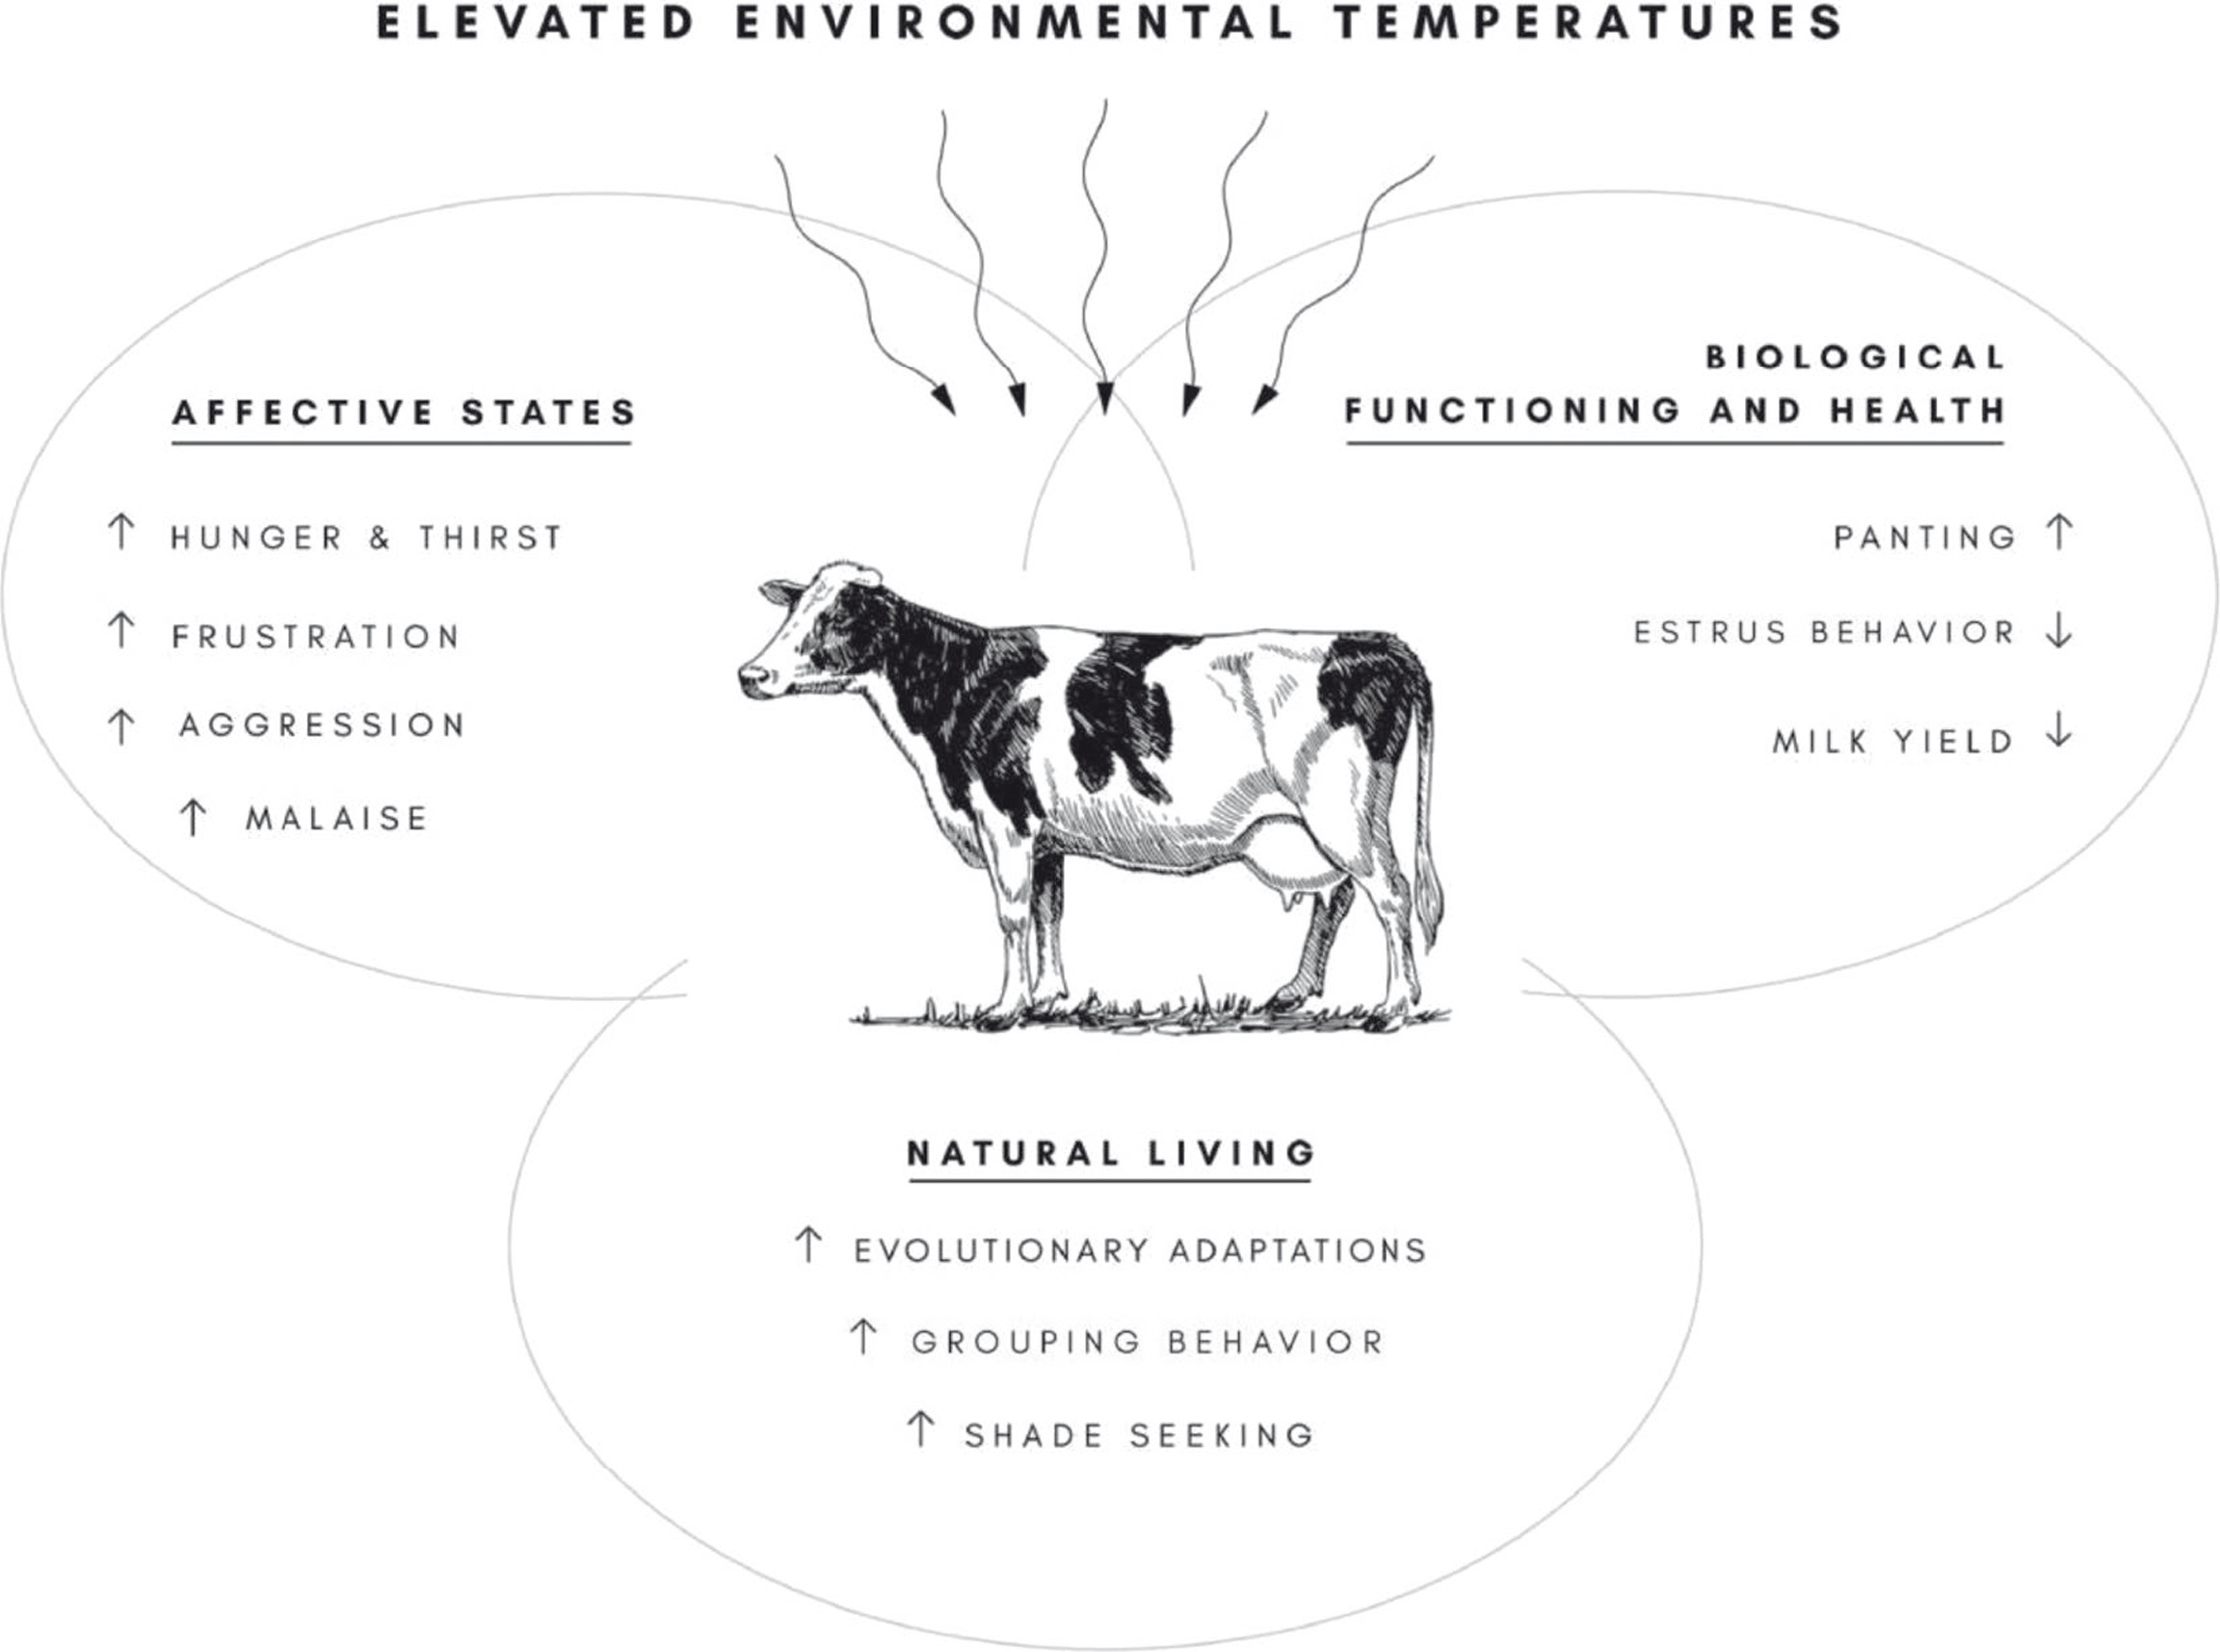 The relationship between the immediate effects of environmental heat stress and the 3 key constructs of animal welfare: (1) the biological functioning (and health) of the animal, (2) the affective states the animal is experiencing, and (3) the naturalness of its life under current heat management strategies (Polsky et al., 2017).